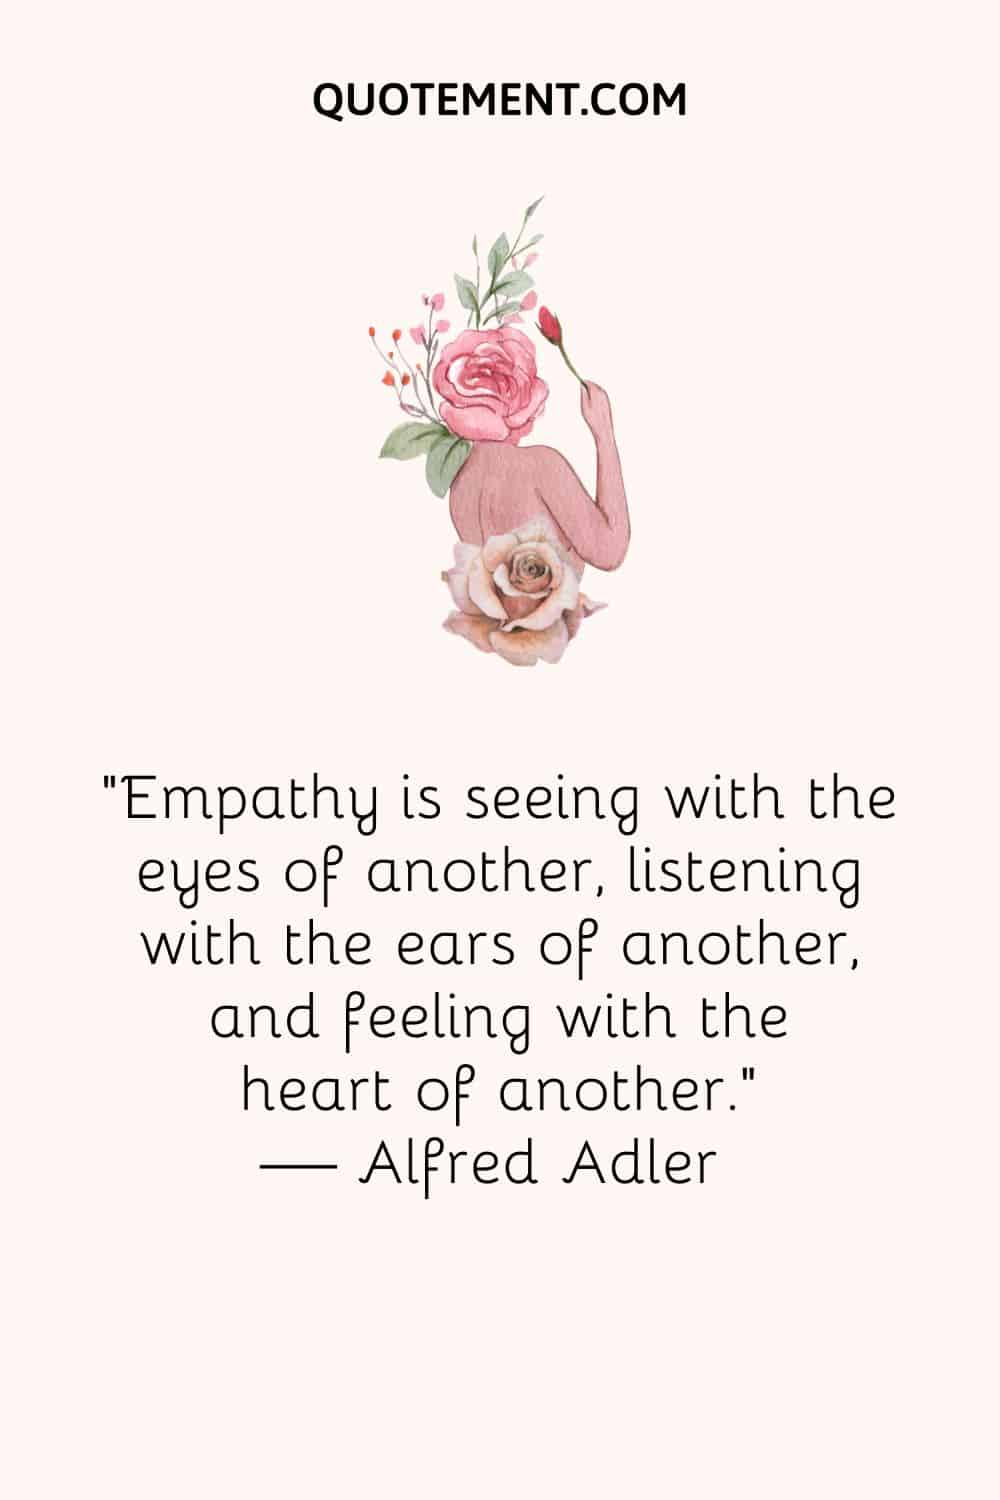 Empathy is seeing with the eyes of another, listening with the ears of another, and feeling with the heart of another